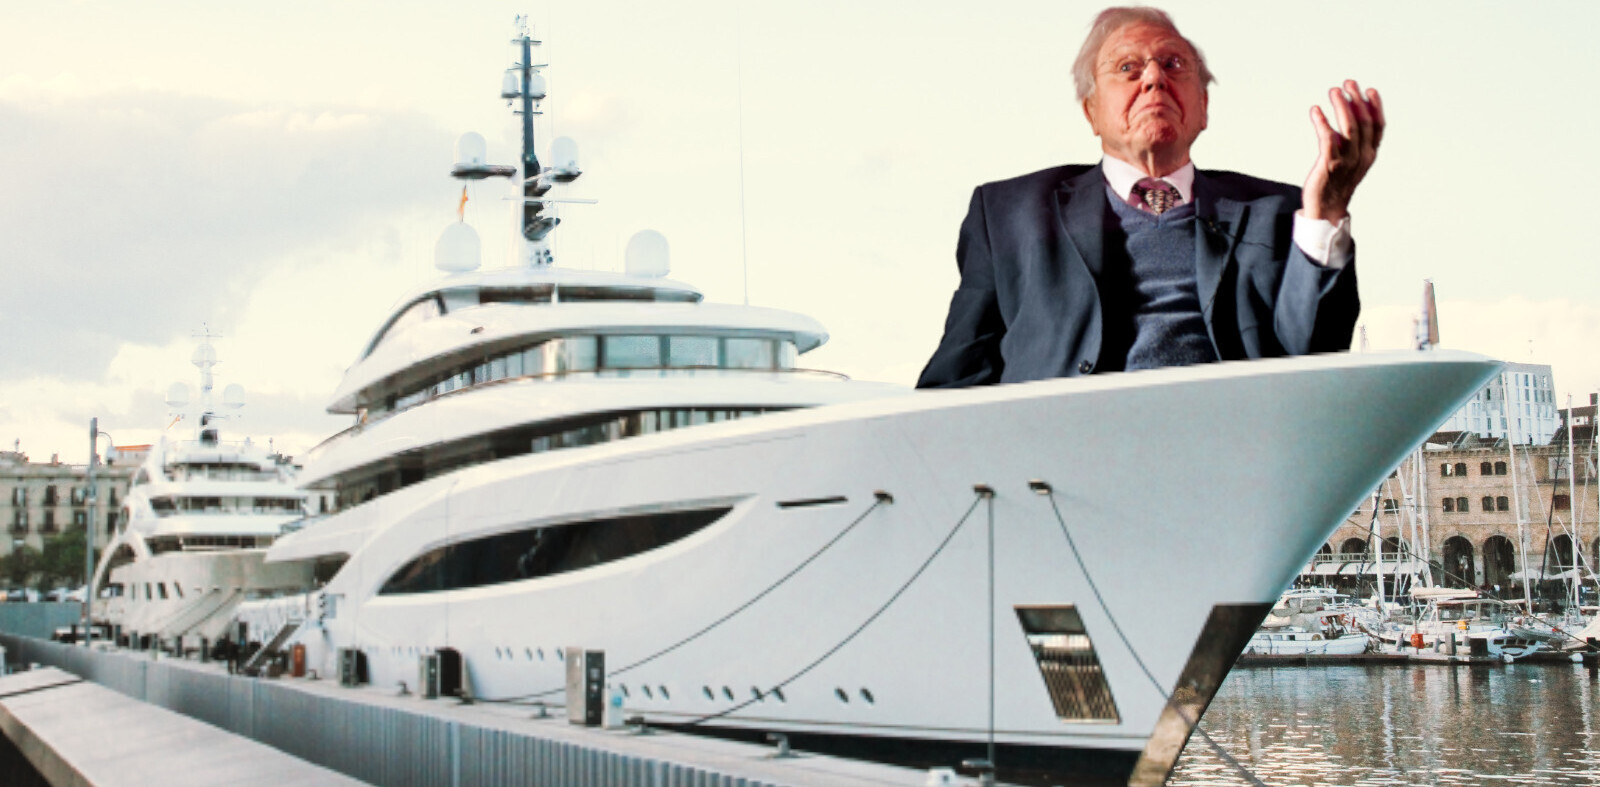 Oi, richy! If you’re going to buy a yacht, at least make it solar-powered